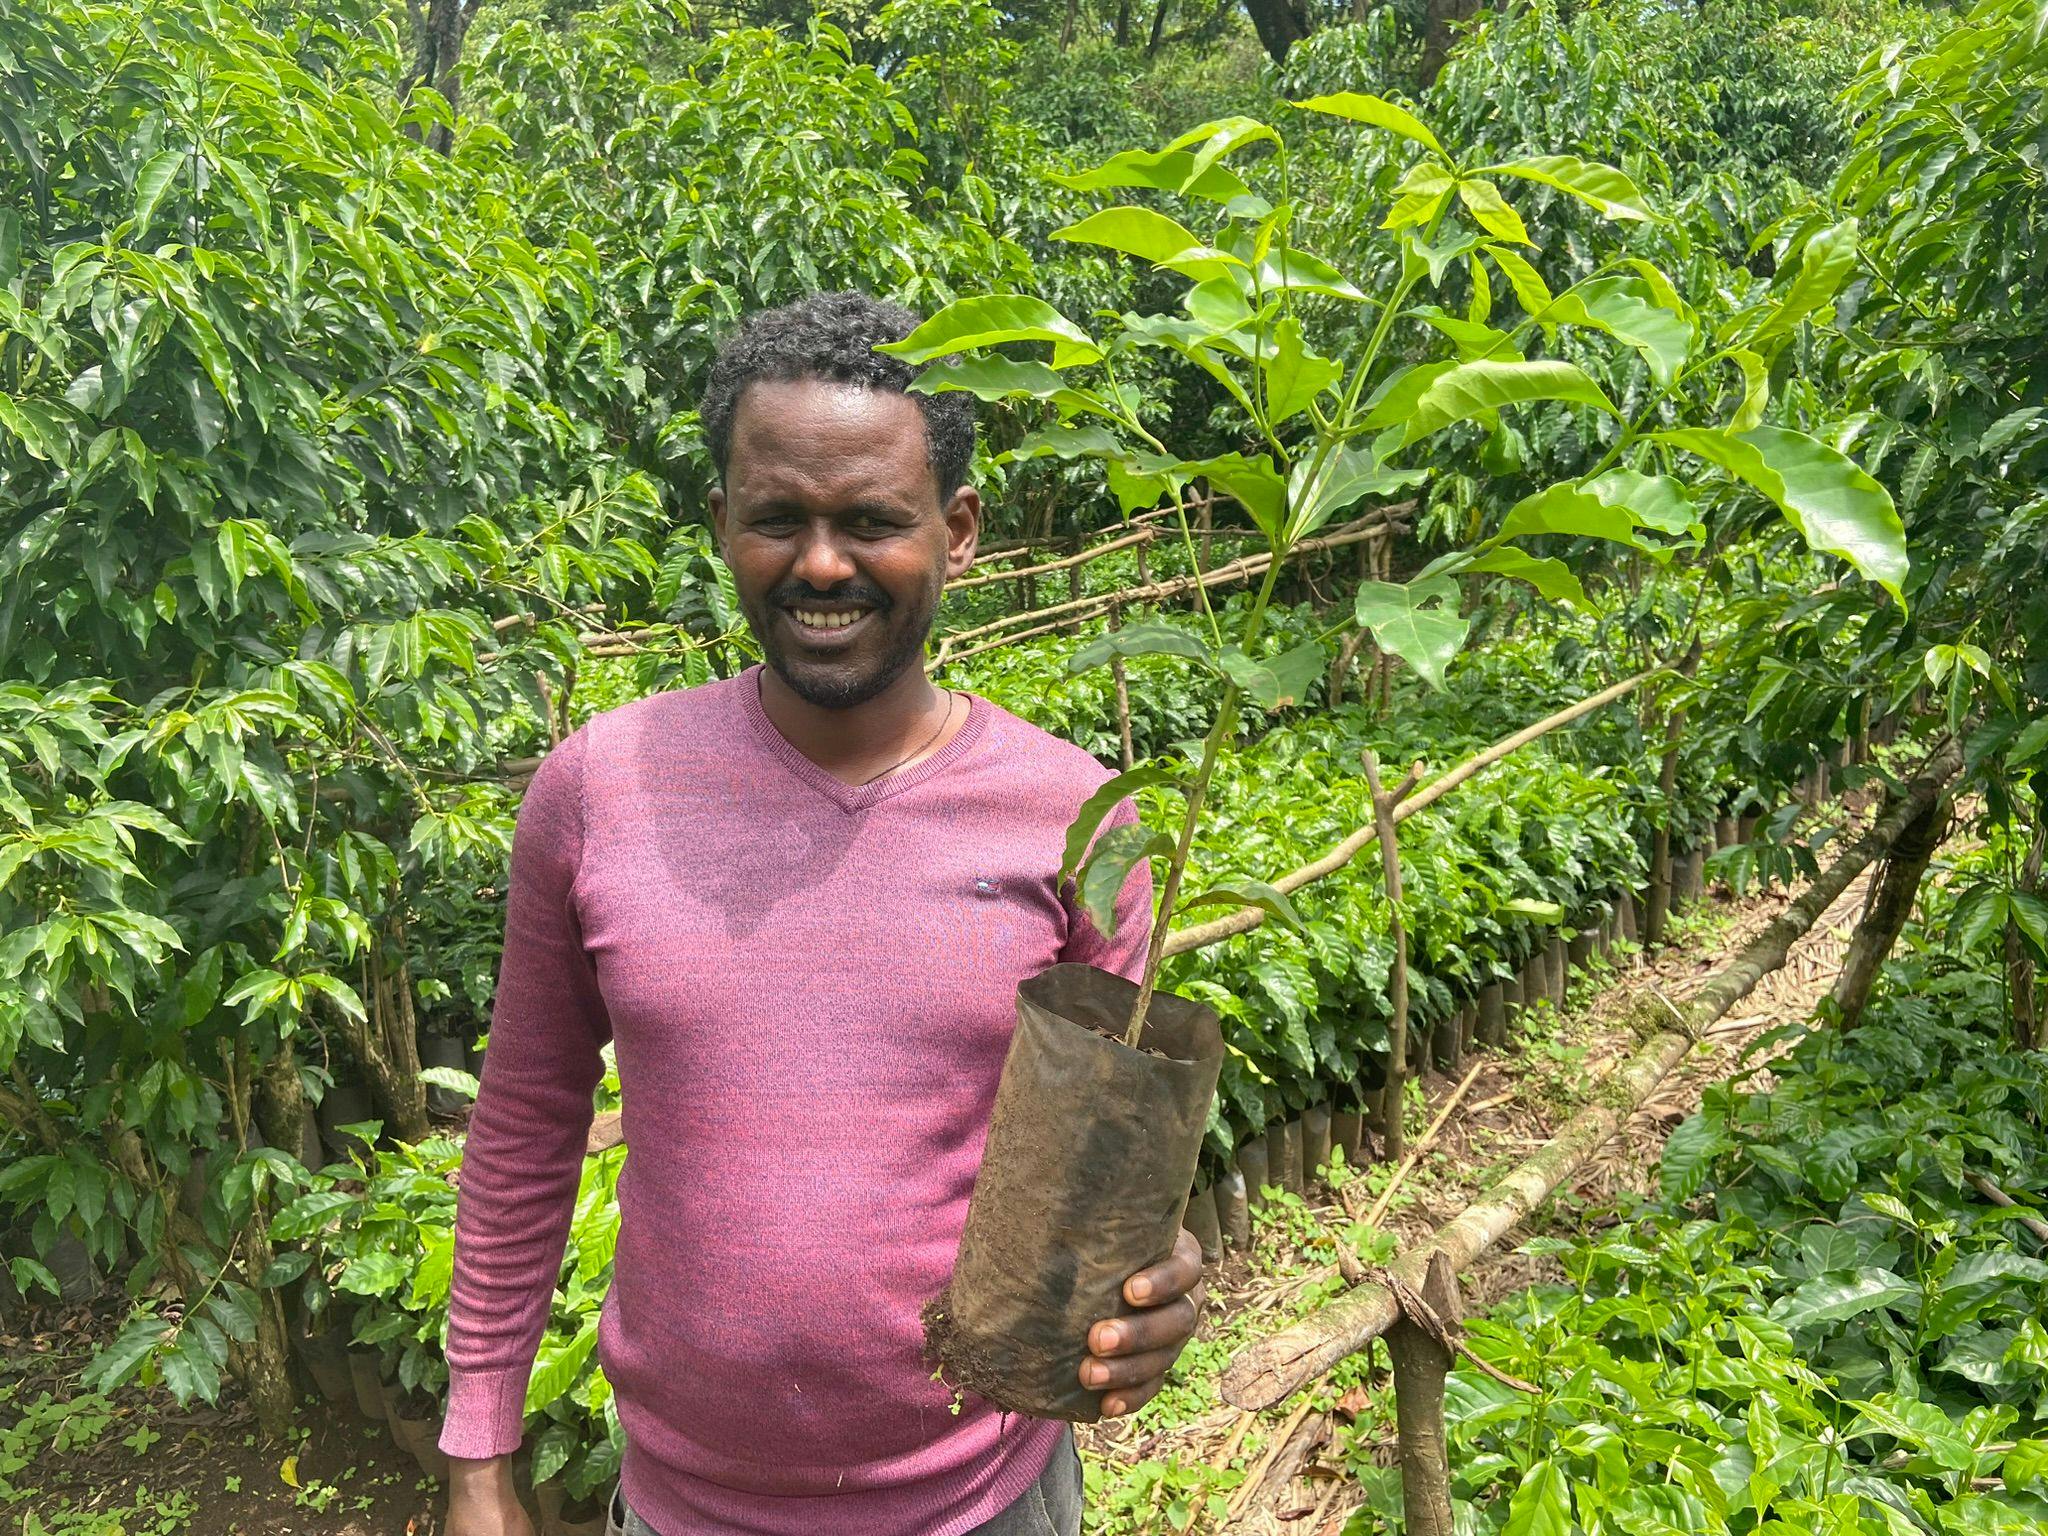 New coffee trees are being developed